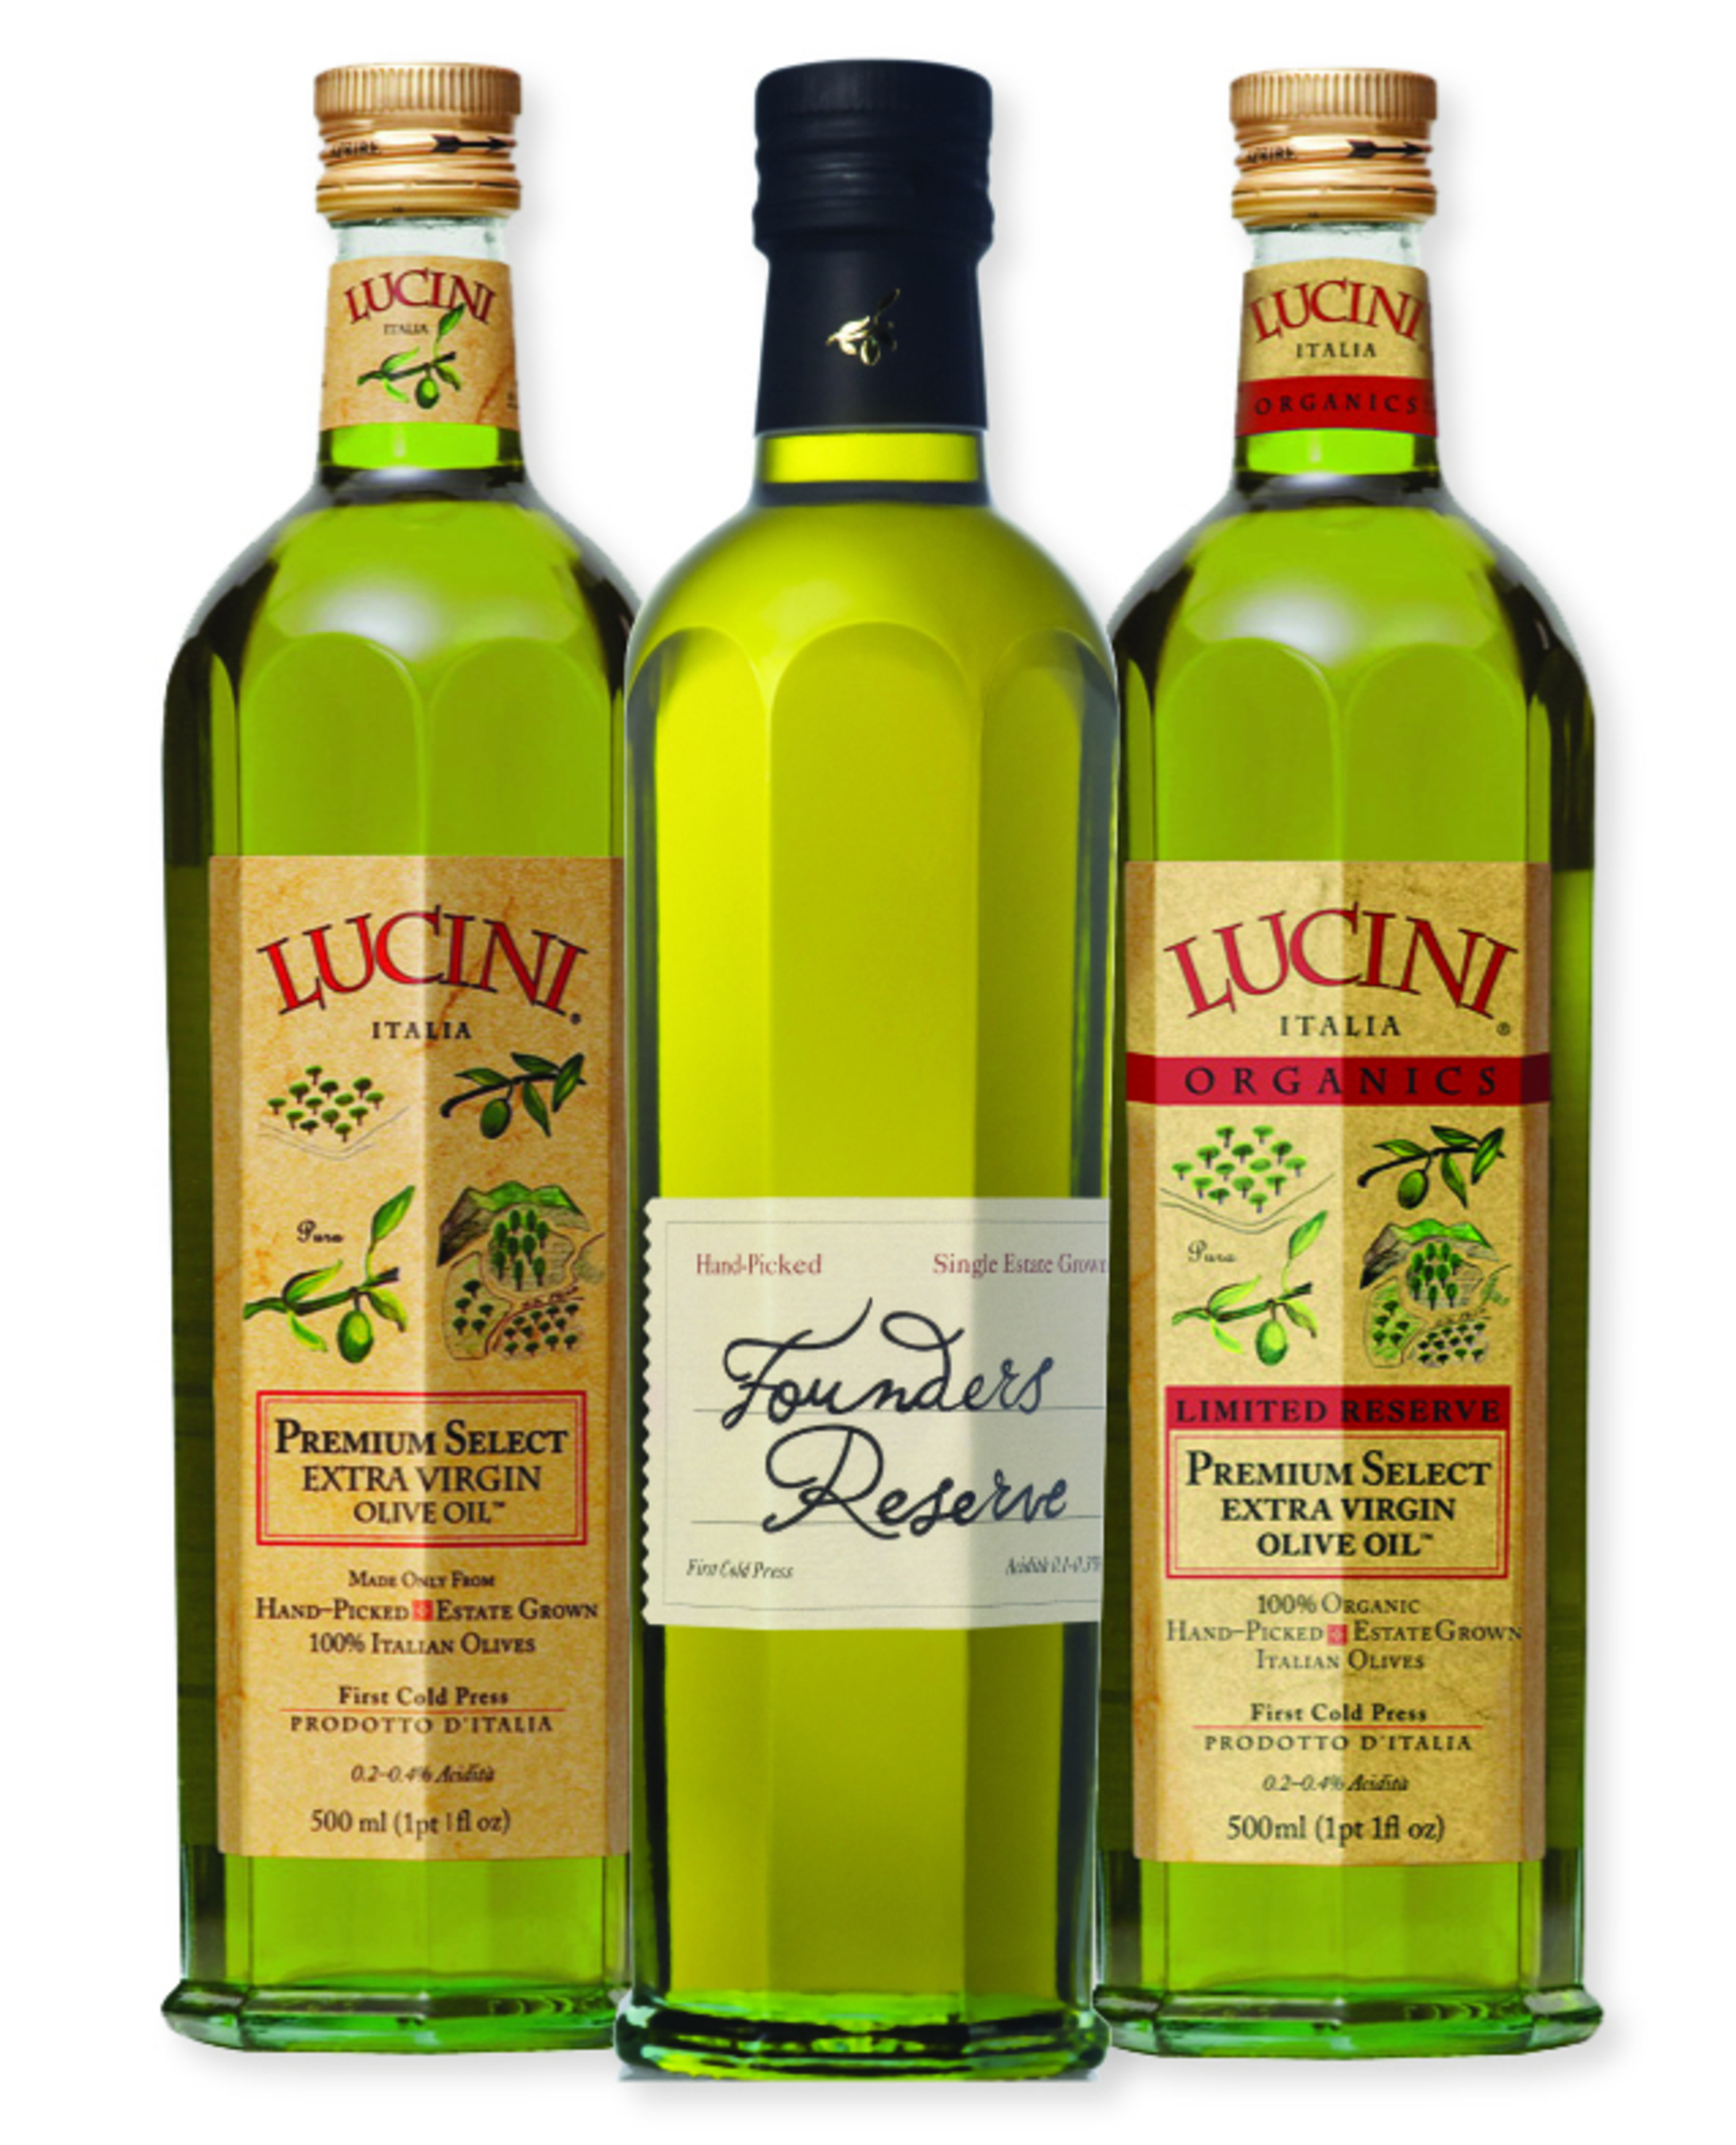 Three Lucini extra virgin olive oils receive medals including two best-of-show awards at the 2014 Olive Japan International Extra Virgin Olive Oil Competition (PRNewsFoto/Lucini Italia)